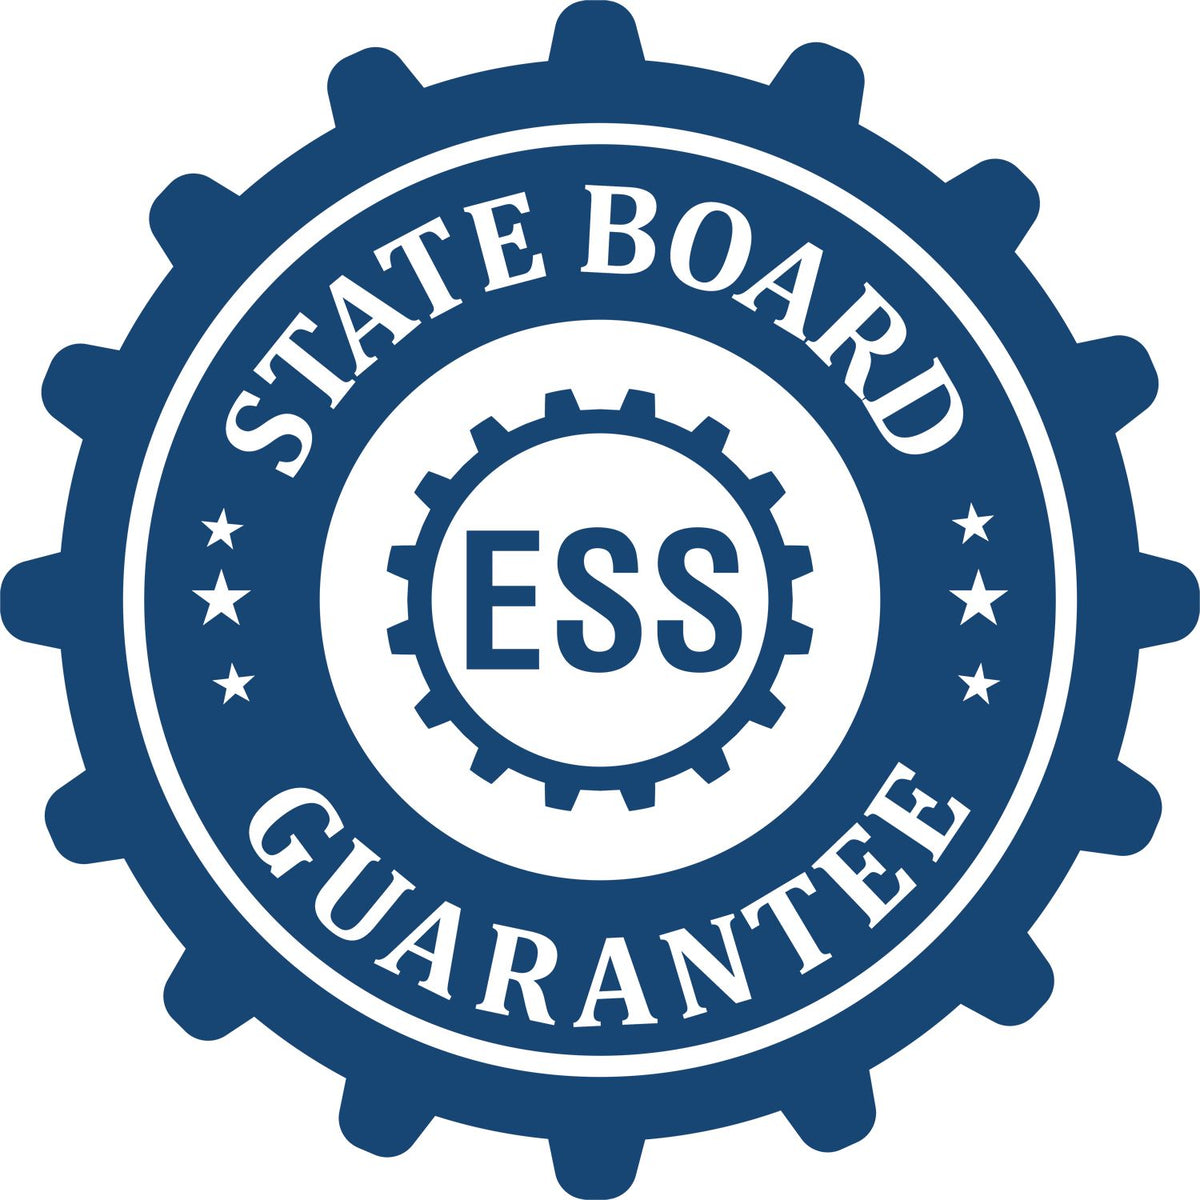 An emblem in a gear shape illustrating a state board guarantee for the State of Arizona Extended Long Reach Geologist Seal